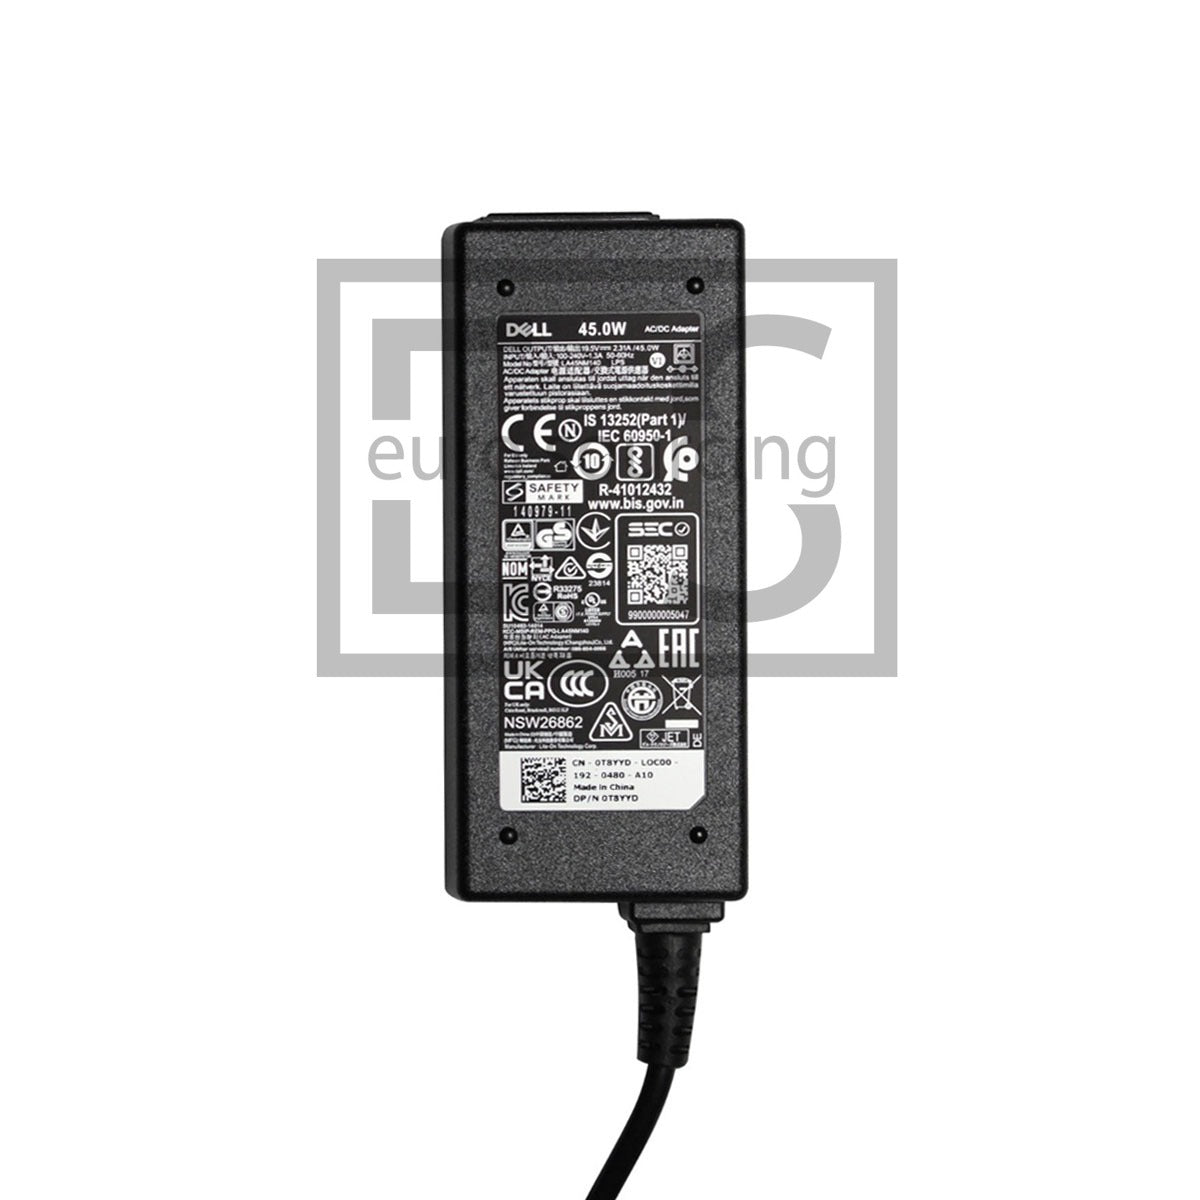 Genuine DELL 19.5V 2.31A DELC231 *ROUND* TYPE DELL BRAND 45W AC ADAPTER 4.5MM x 3.0MM Compatible With DELL P60G003